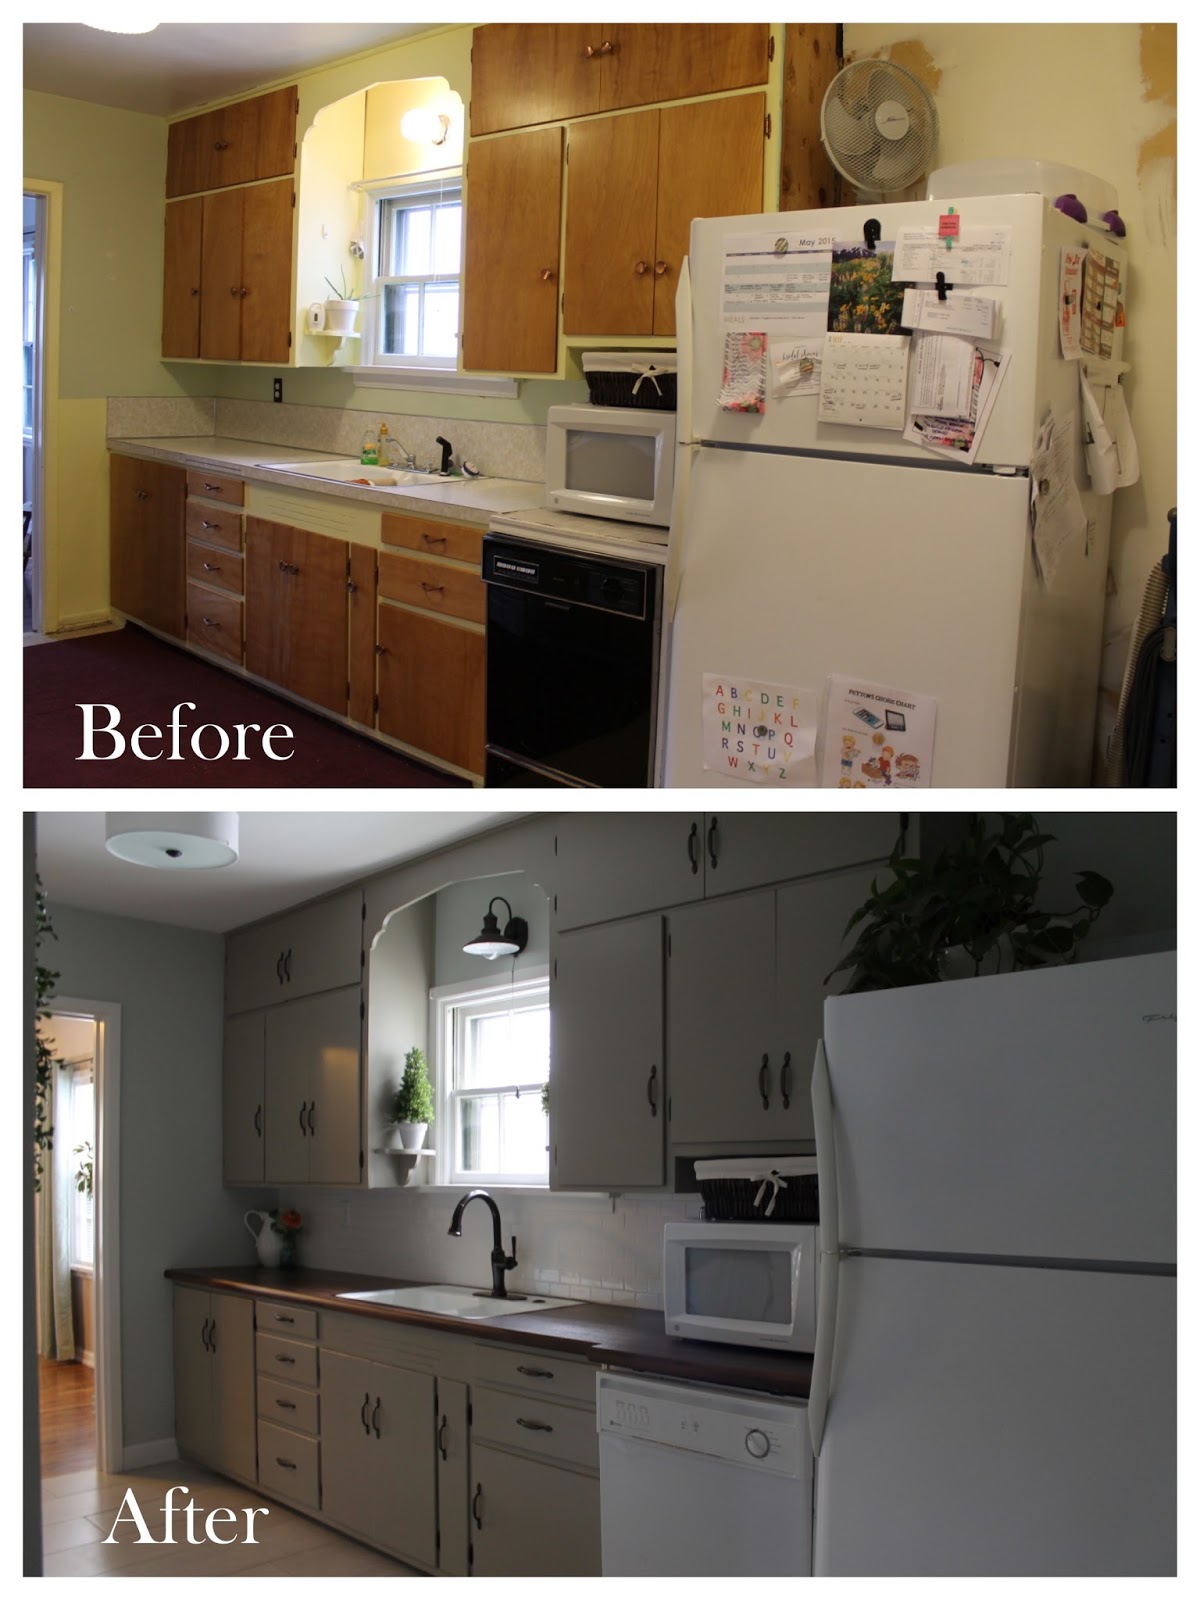 Happy Thoughts: Kitchen Remodel Before and After